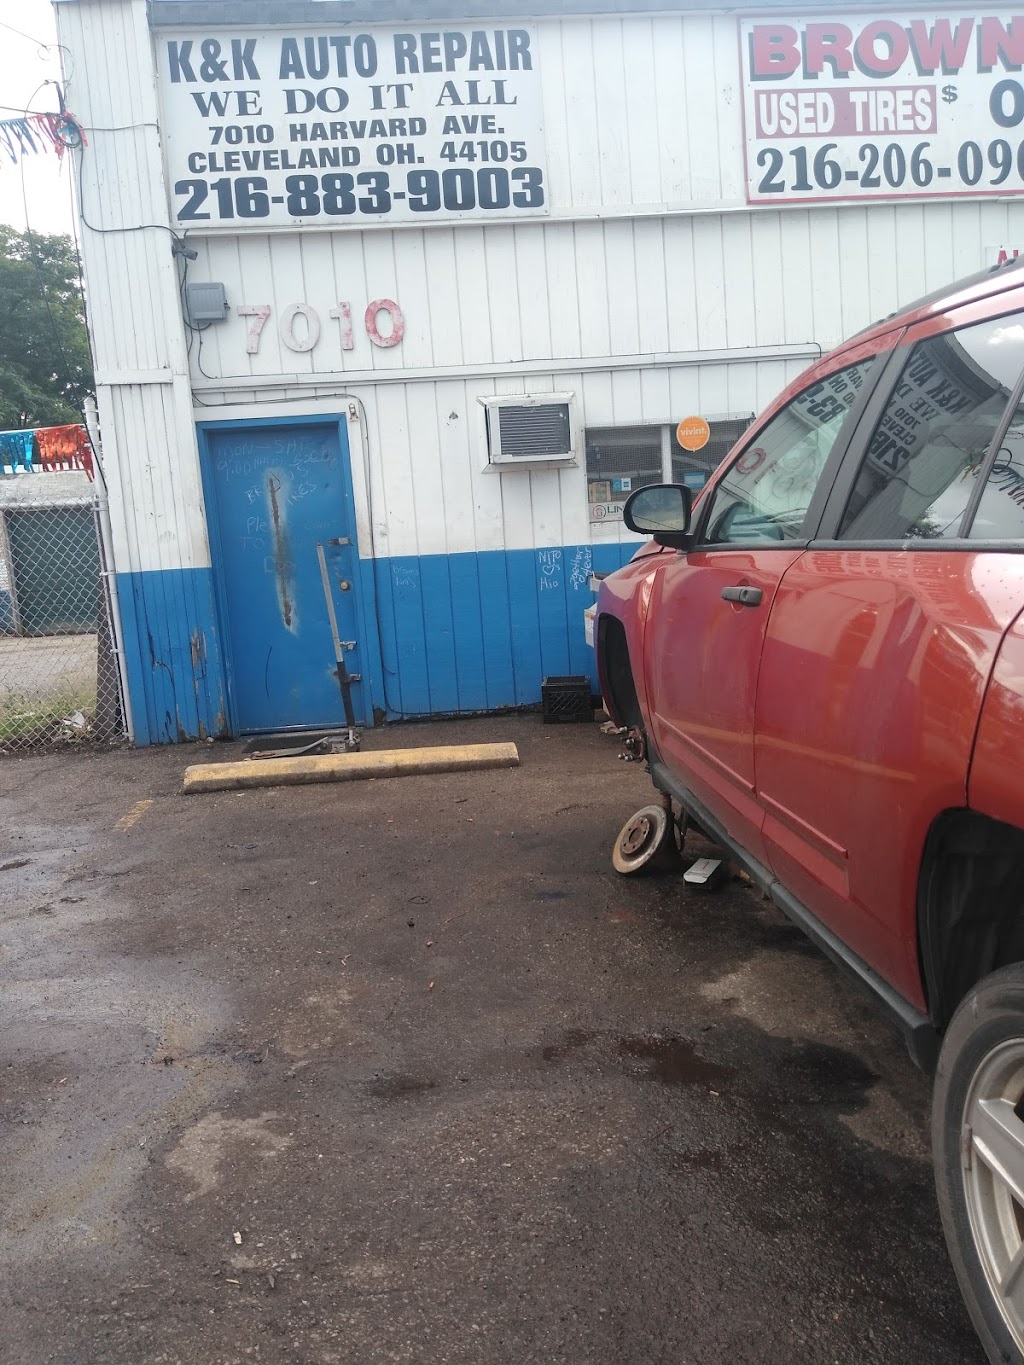 Browns Used Tires LLC | 7010 Harvard Ave, Cleveland, OH 44105, USA | Phone: (216) 206-0905